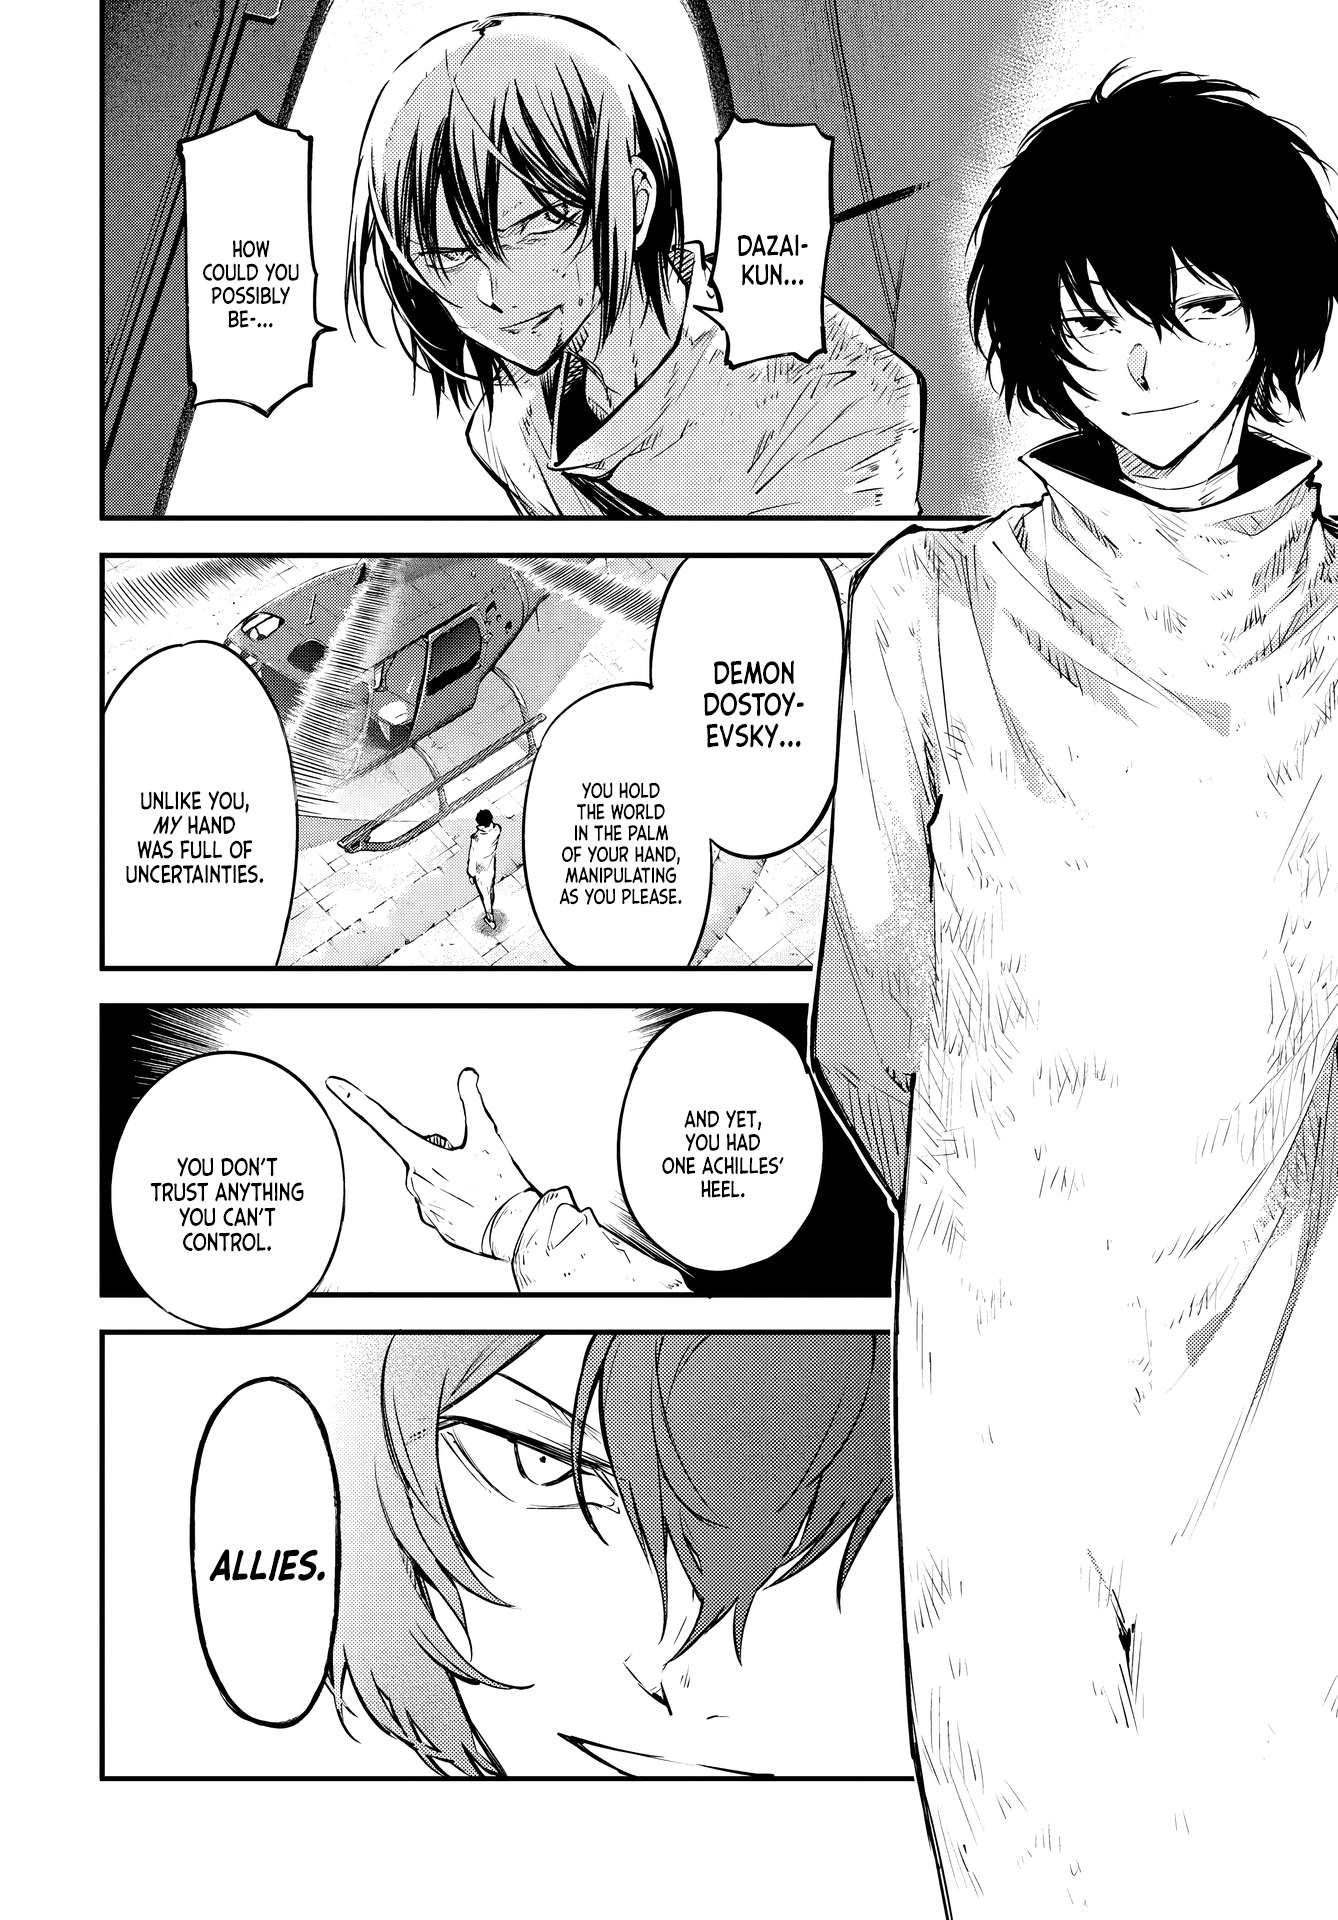 Bungo Stray Dogs chapter 111.5 page 9